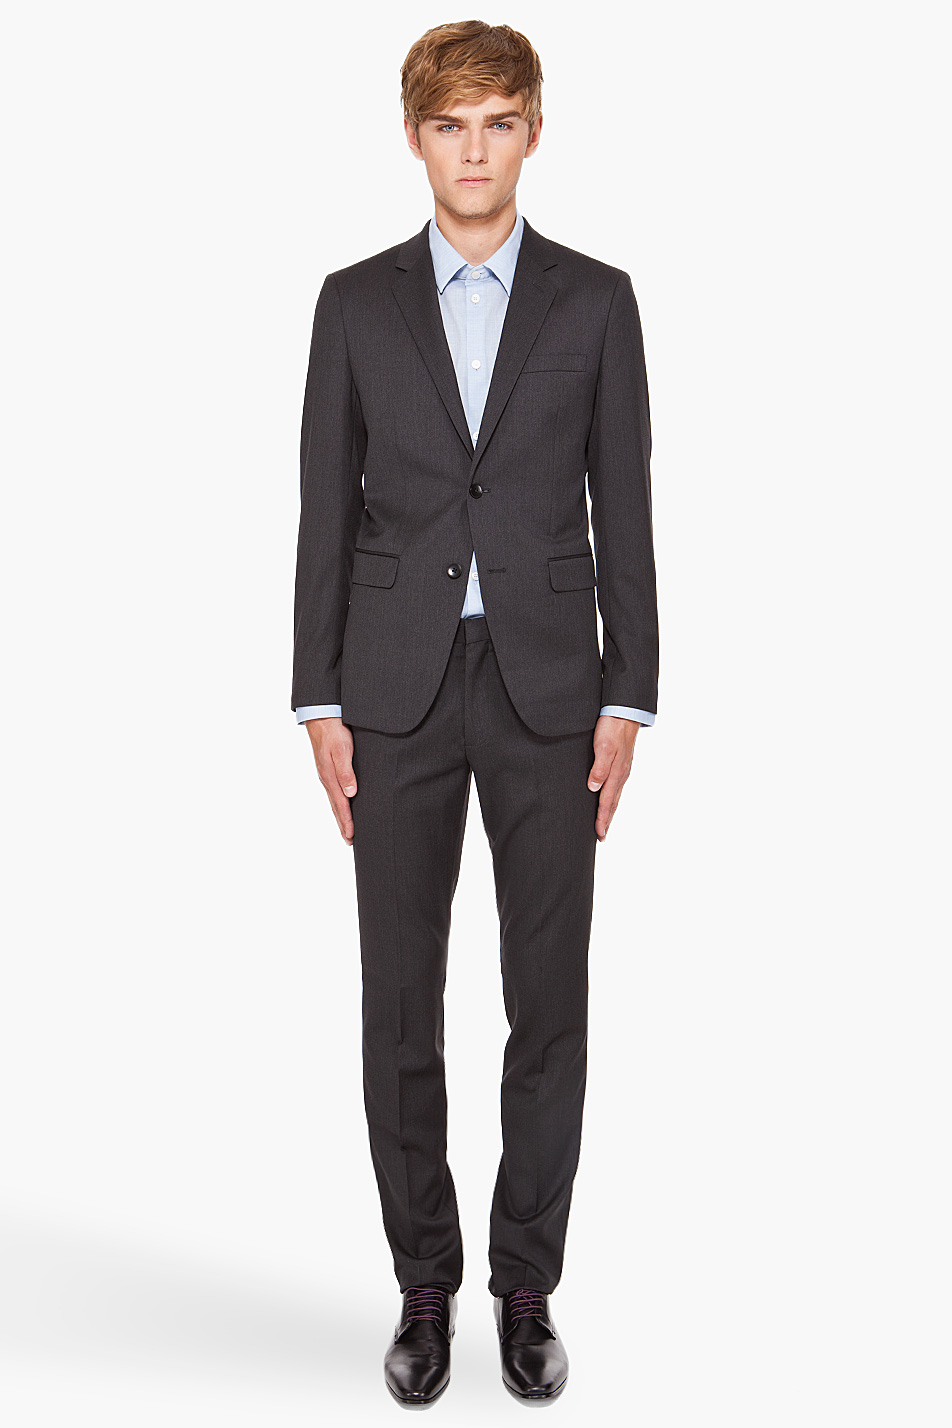 Lyst - Theory Dilano Suit in Gray for Men